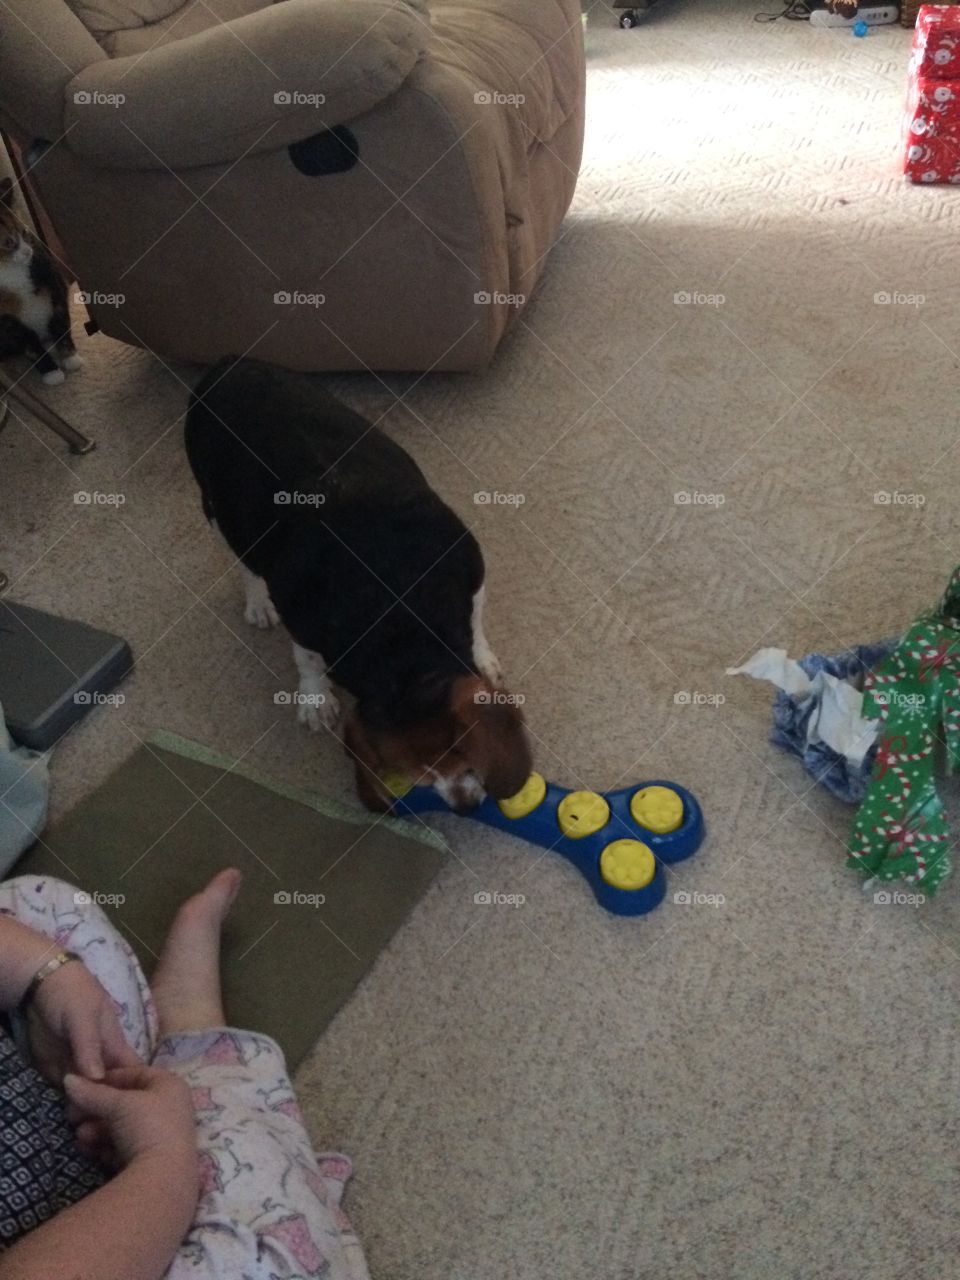 New toy for dog beagle they have to find the treats in the cups and remove the cup for the treat 